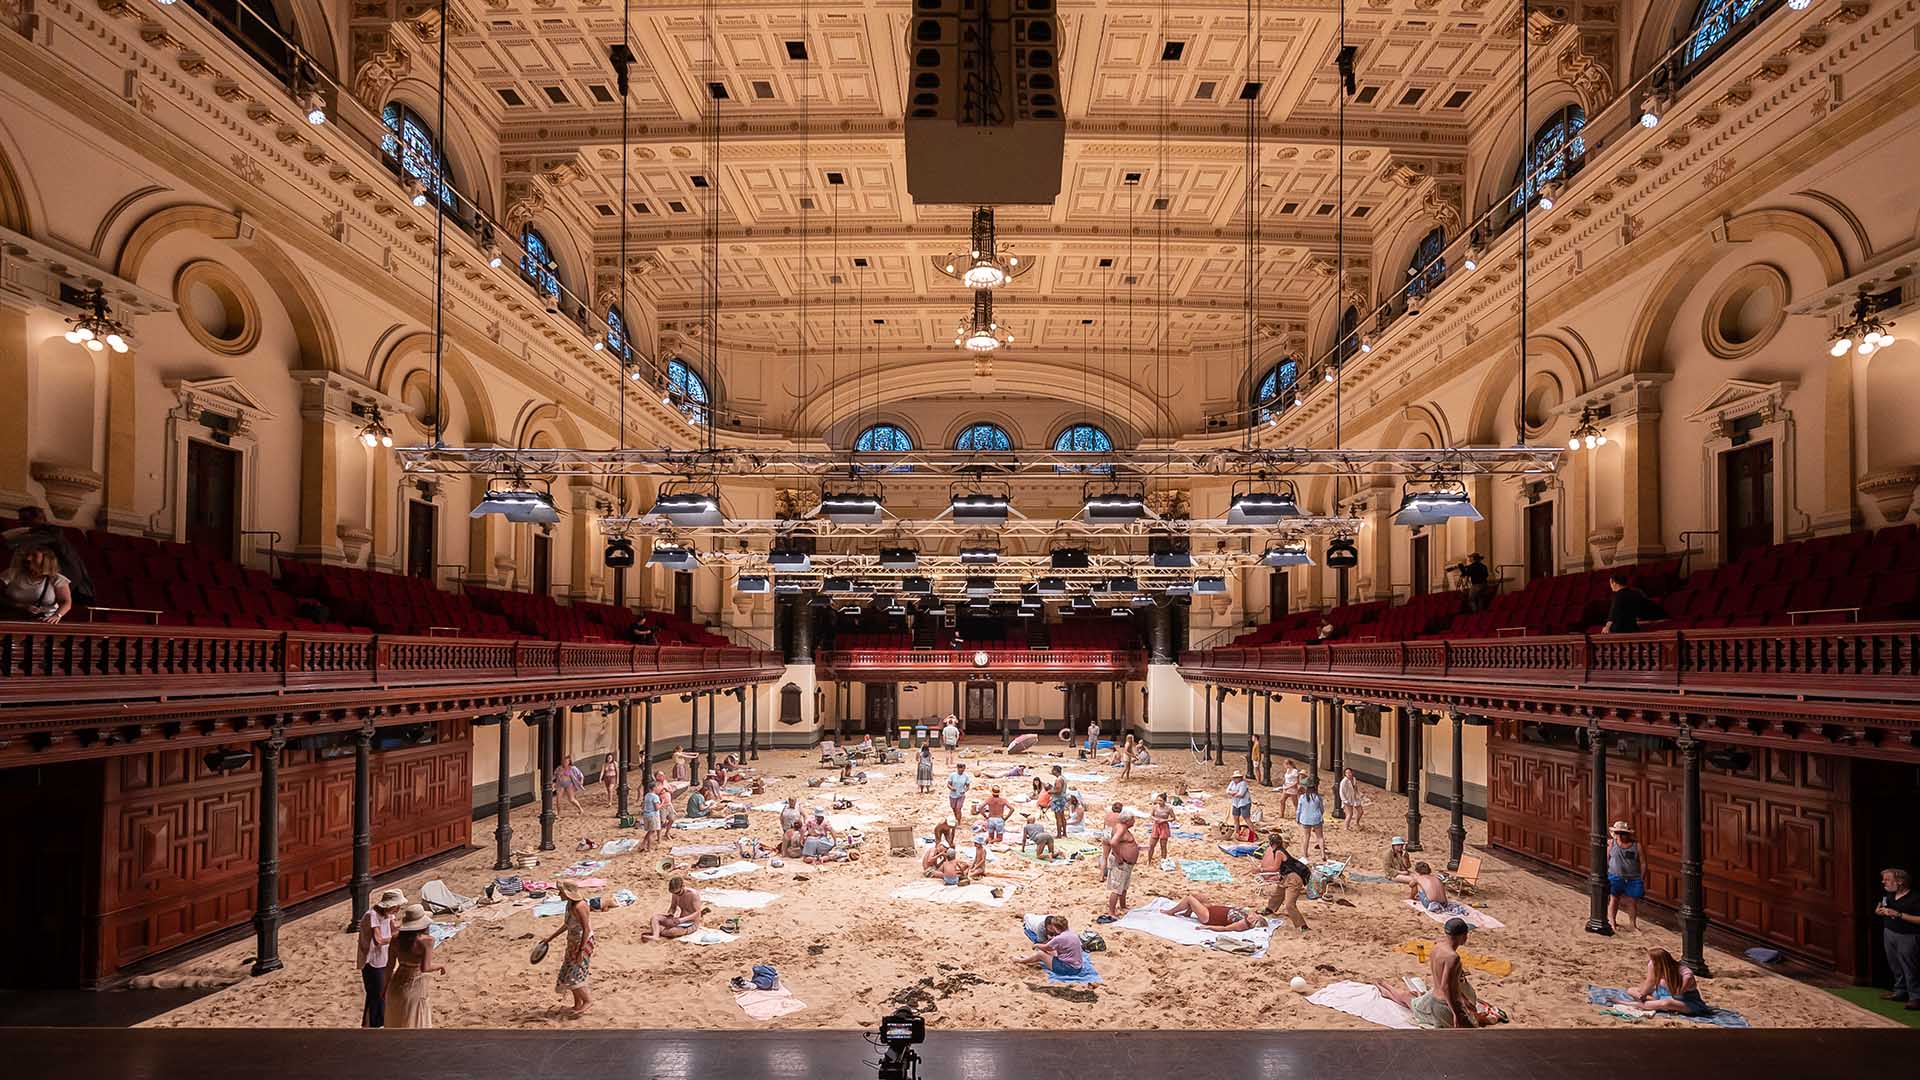 Sydney Town Hall Has Temporarily Turned Into an Indoor Beach Complete with 26 Tonnes of Sand